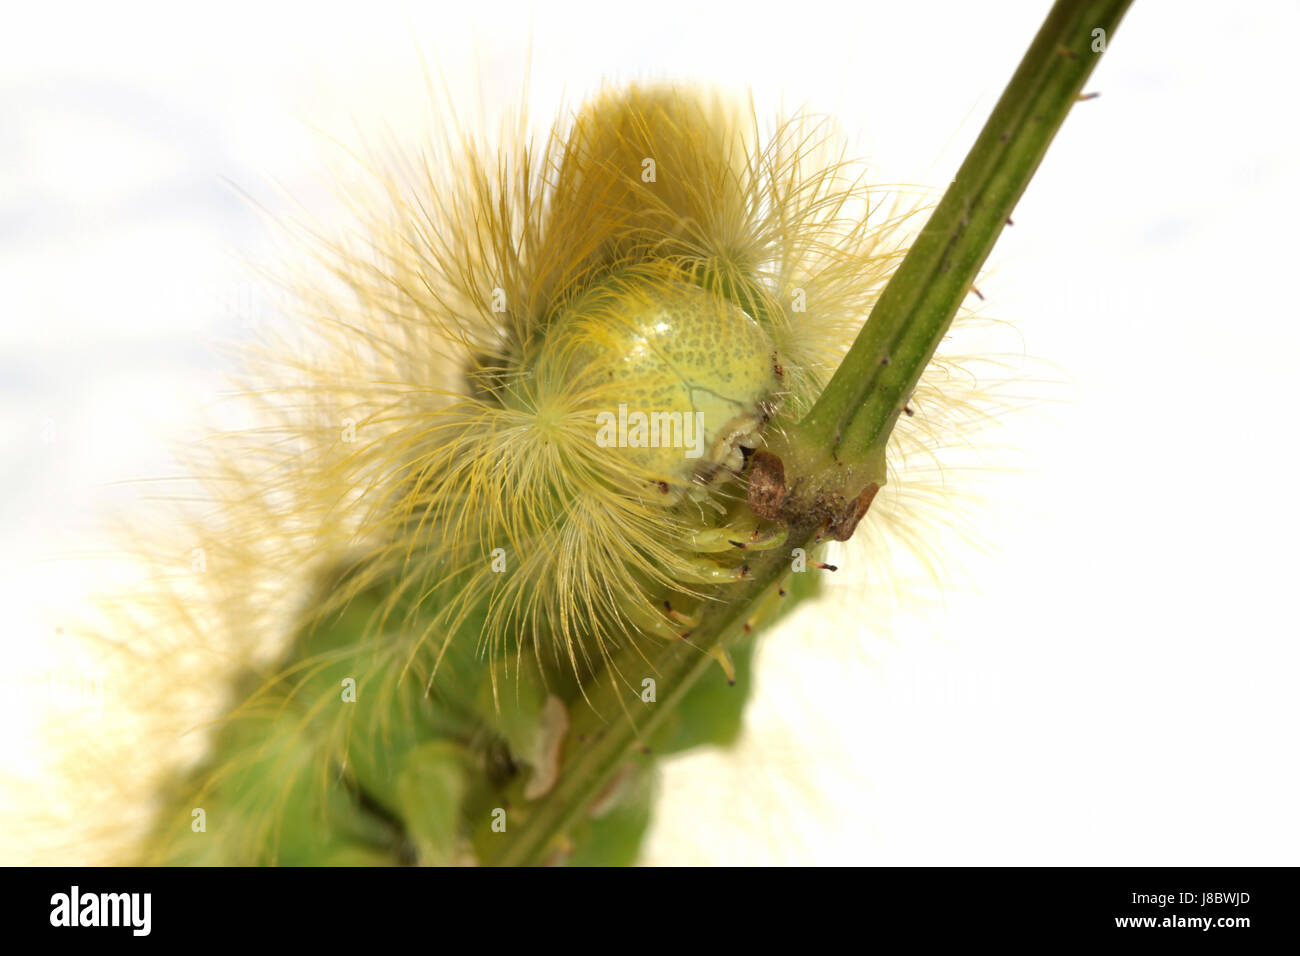 insect, butterfly, hairy, haired, caterpillar, varmint, screwball, Stock Photo